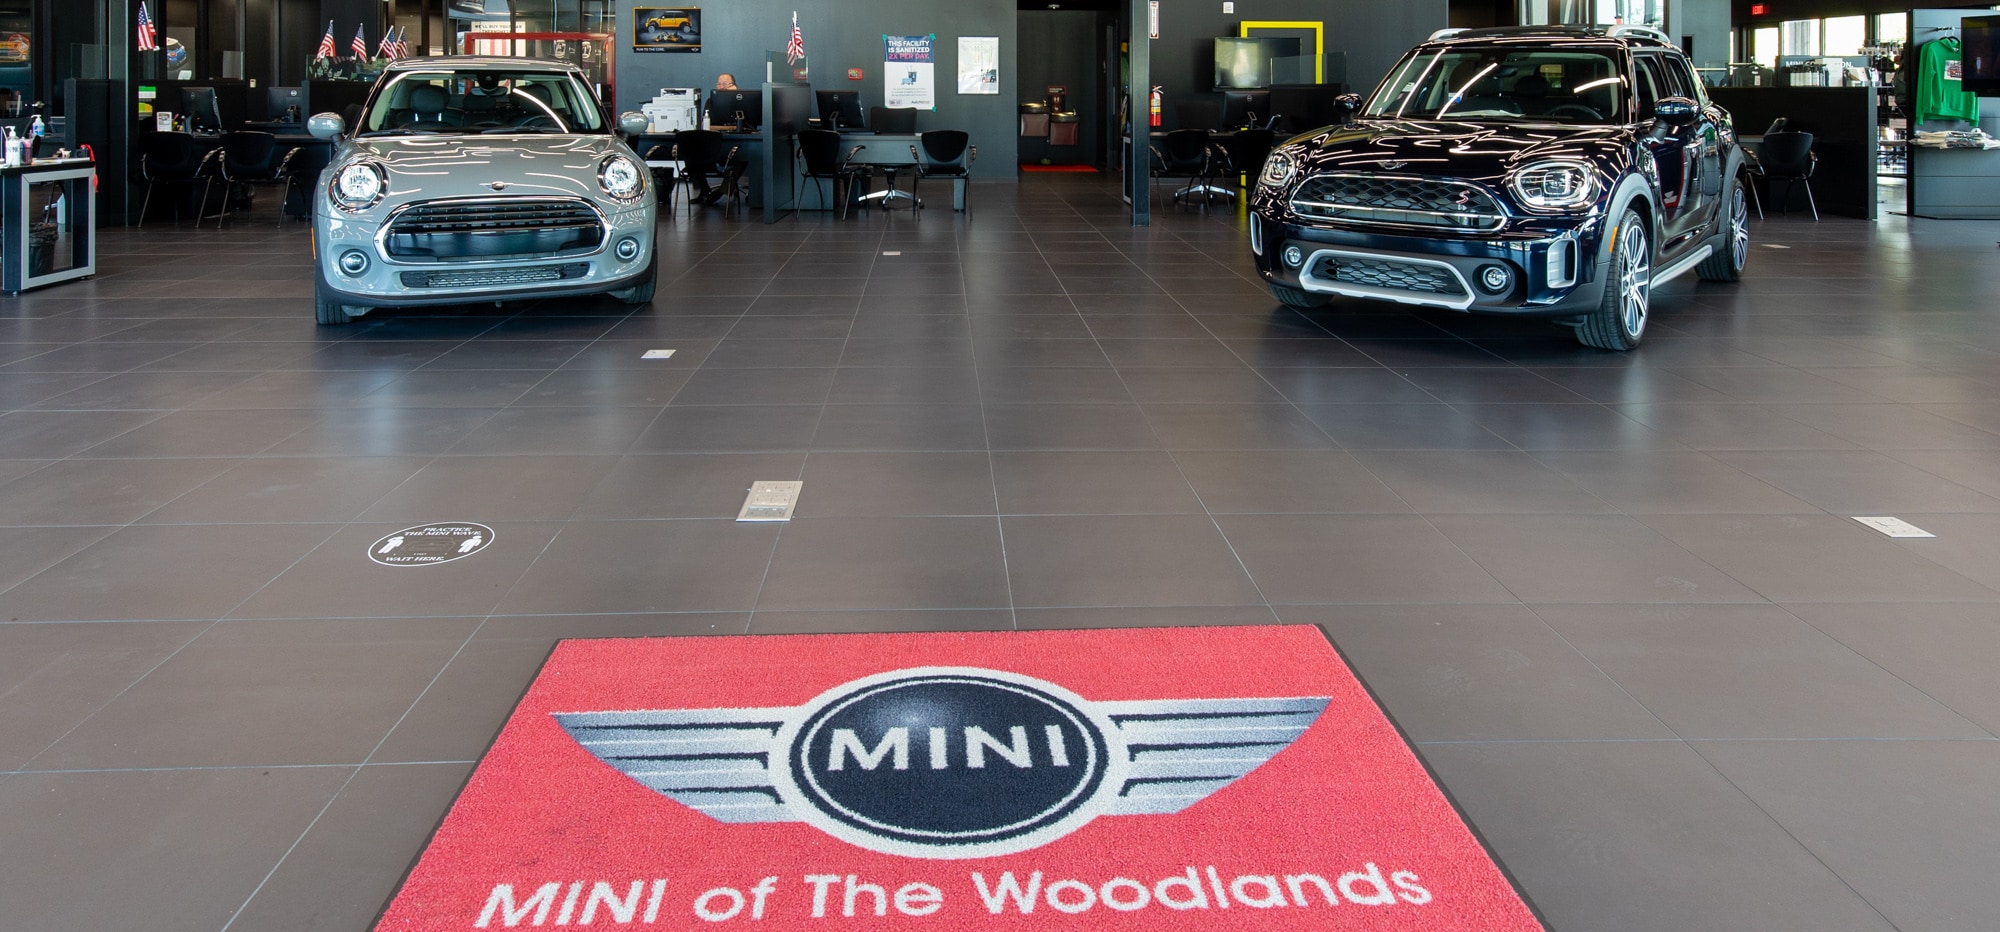 Exterior view of MINI of the Woodlands